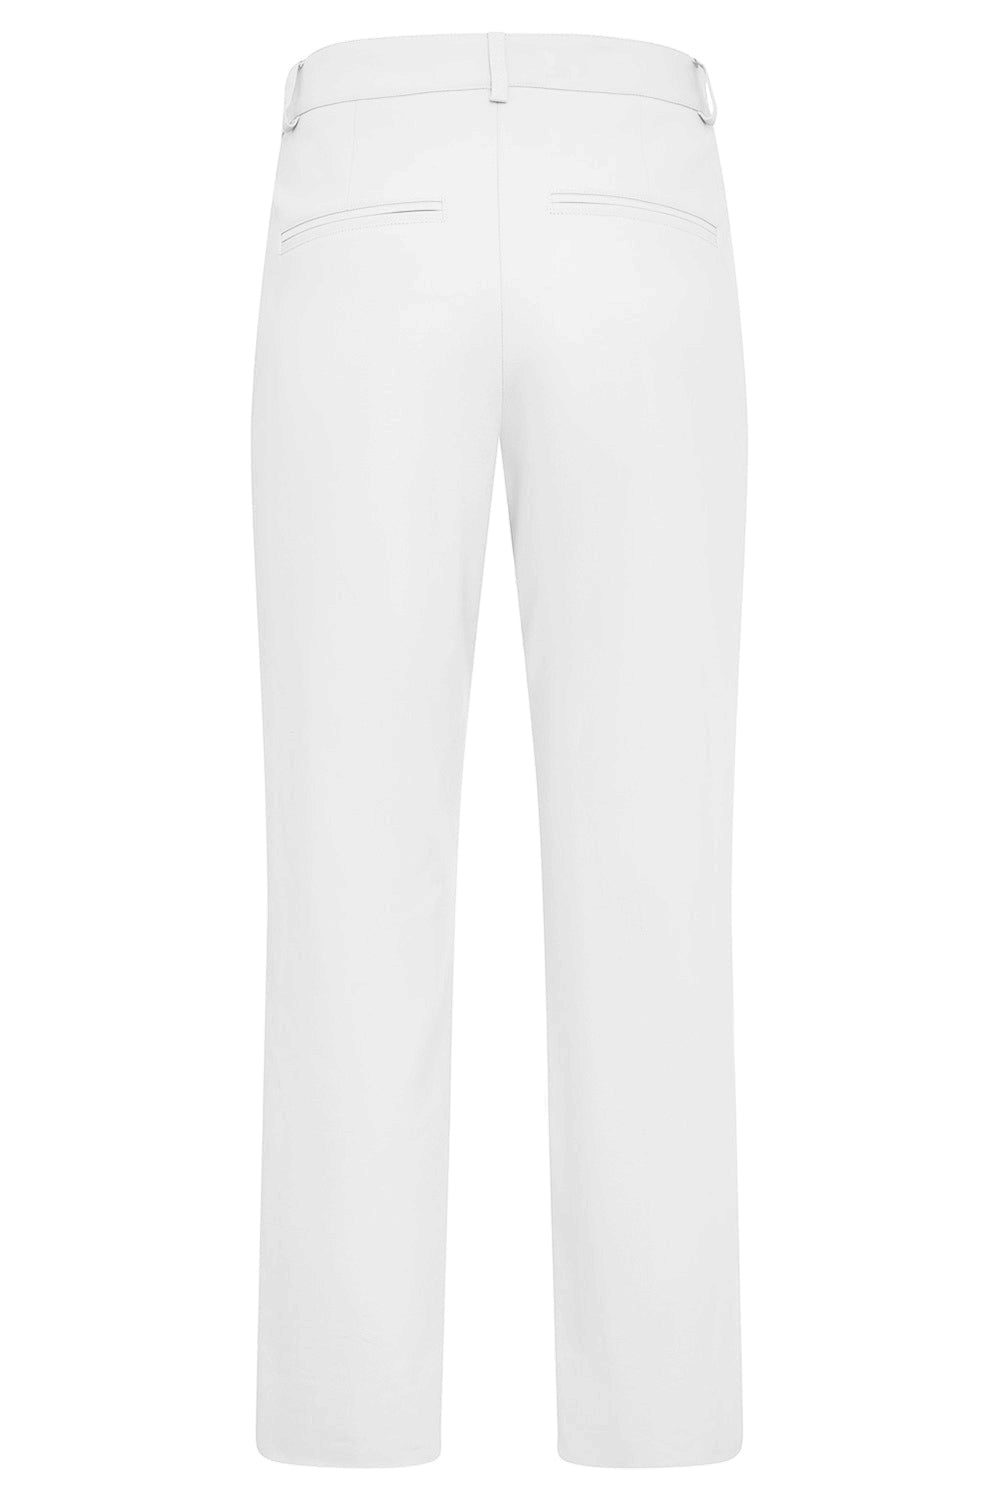 MAISON COMMON-Tab Front Slim Ankle Pant - Ivory-